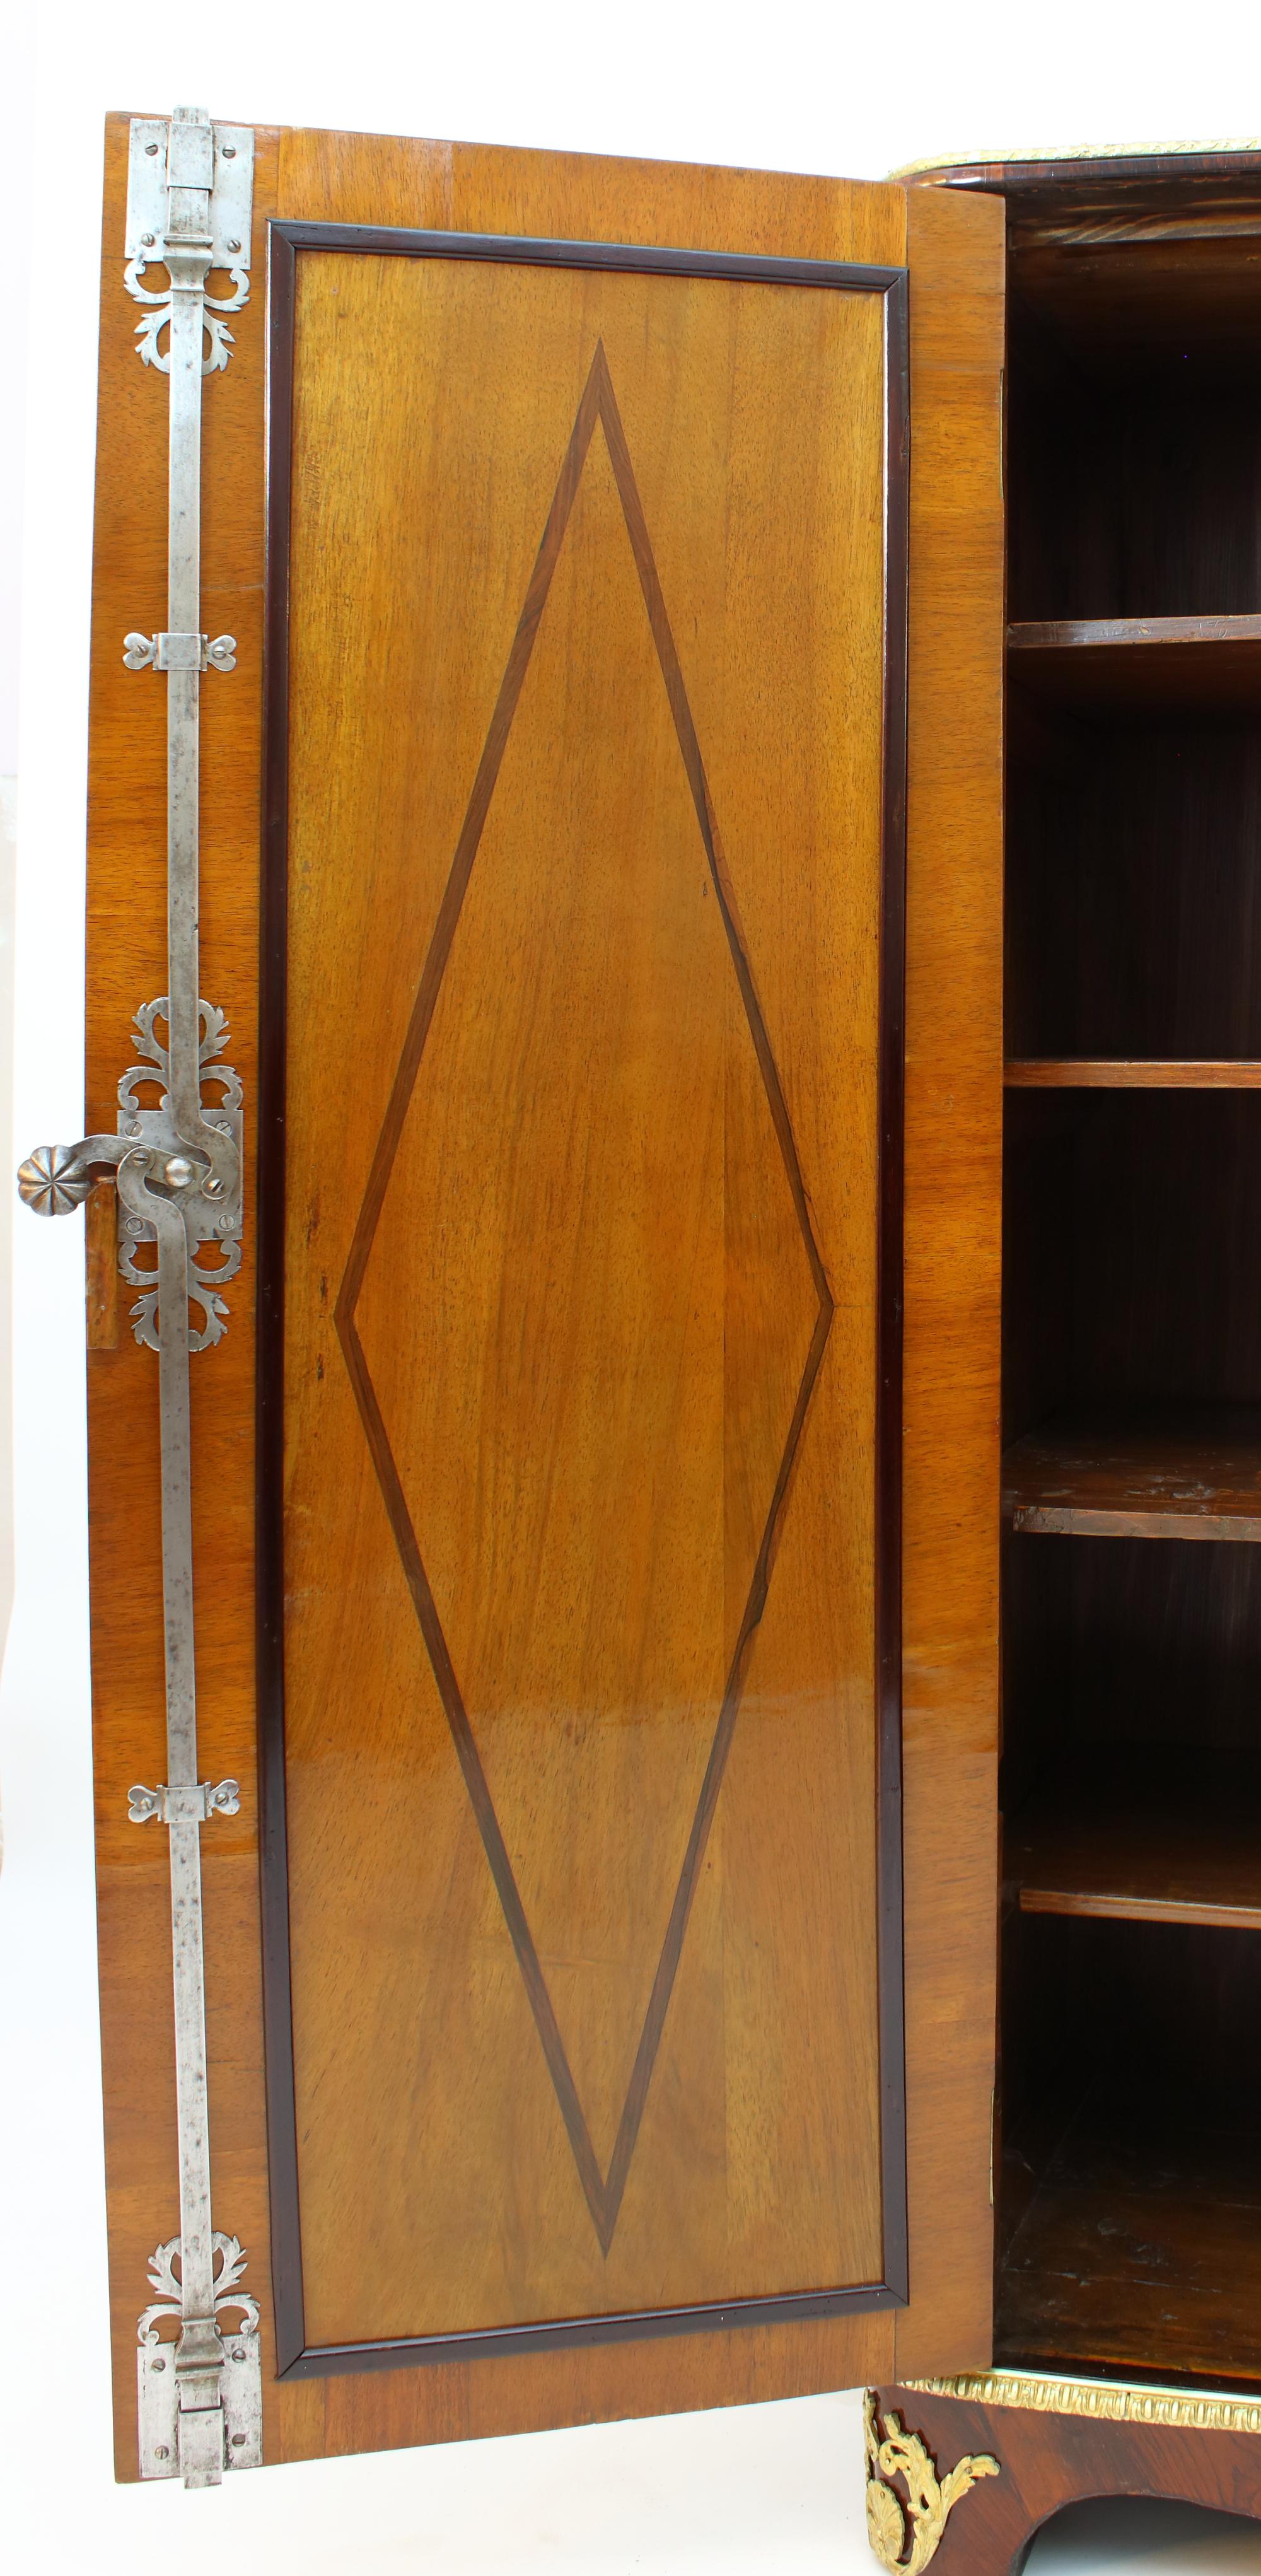 Early 18th Century French Louis XIV Régence Trellis Marquetry Armoire Wardrobe For Sale 1